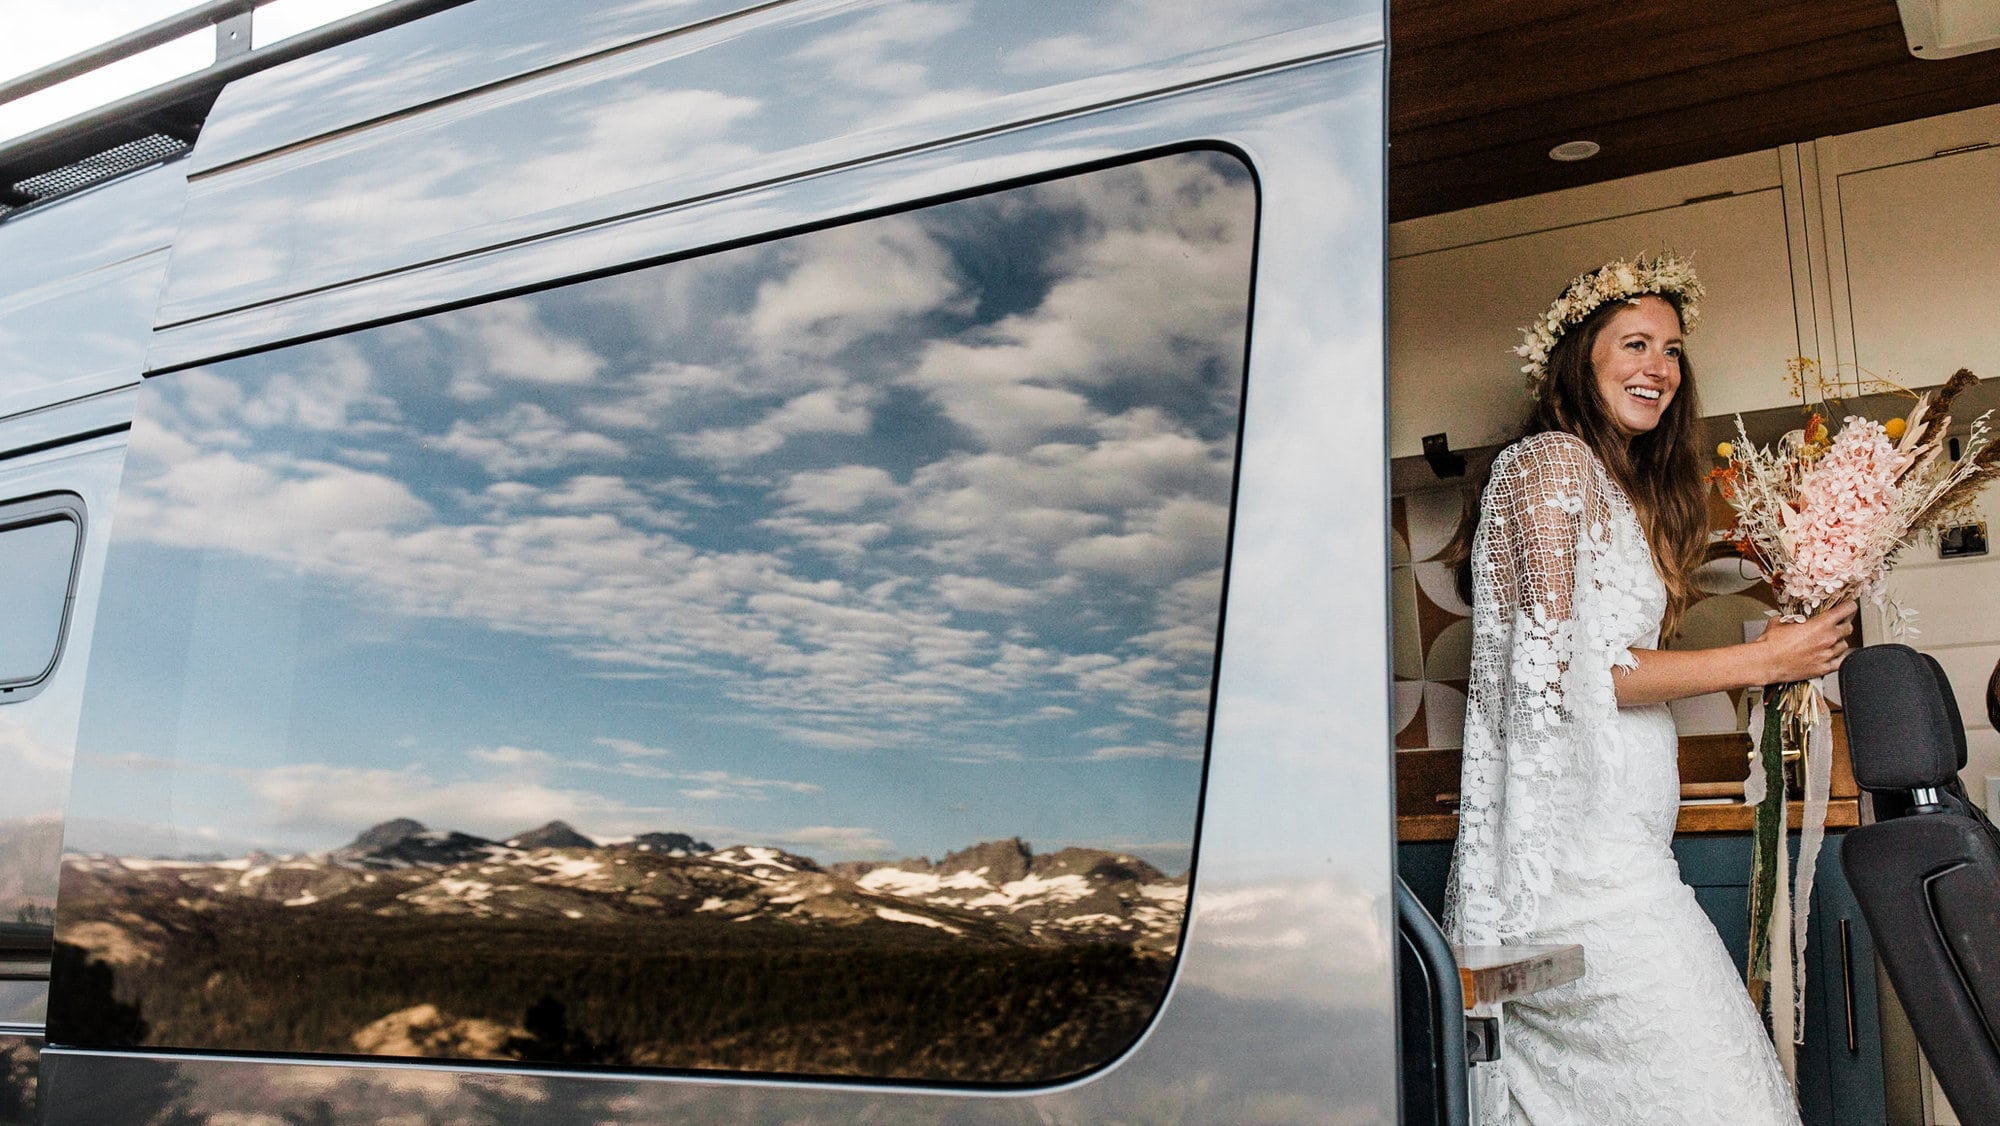 Skiing in the summer doesn't always happen- but after a record breaking winter these two got the Mammoth Lakes elopement of their dreams.